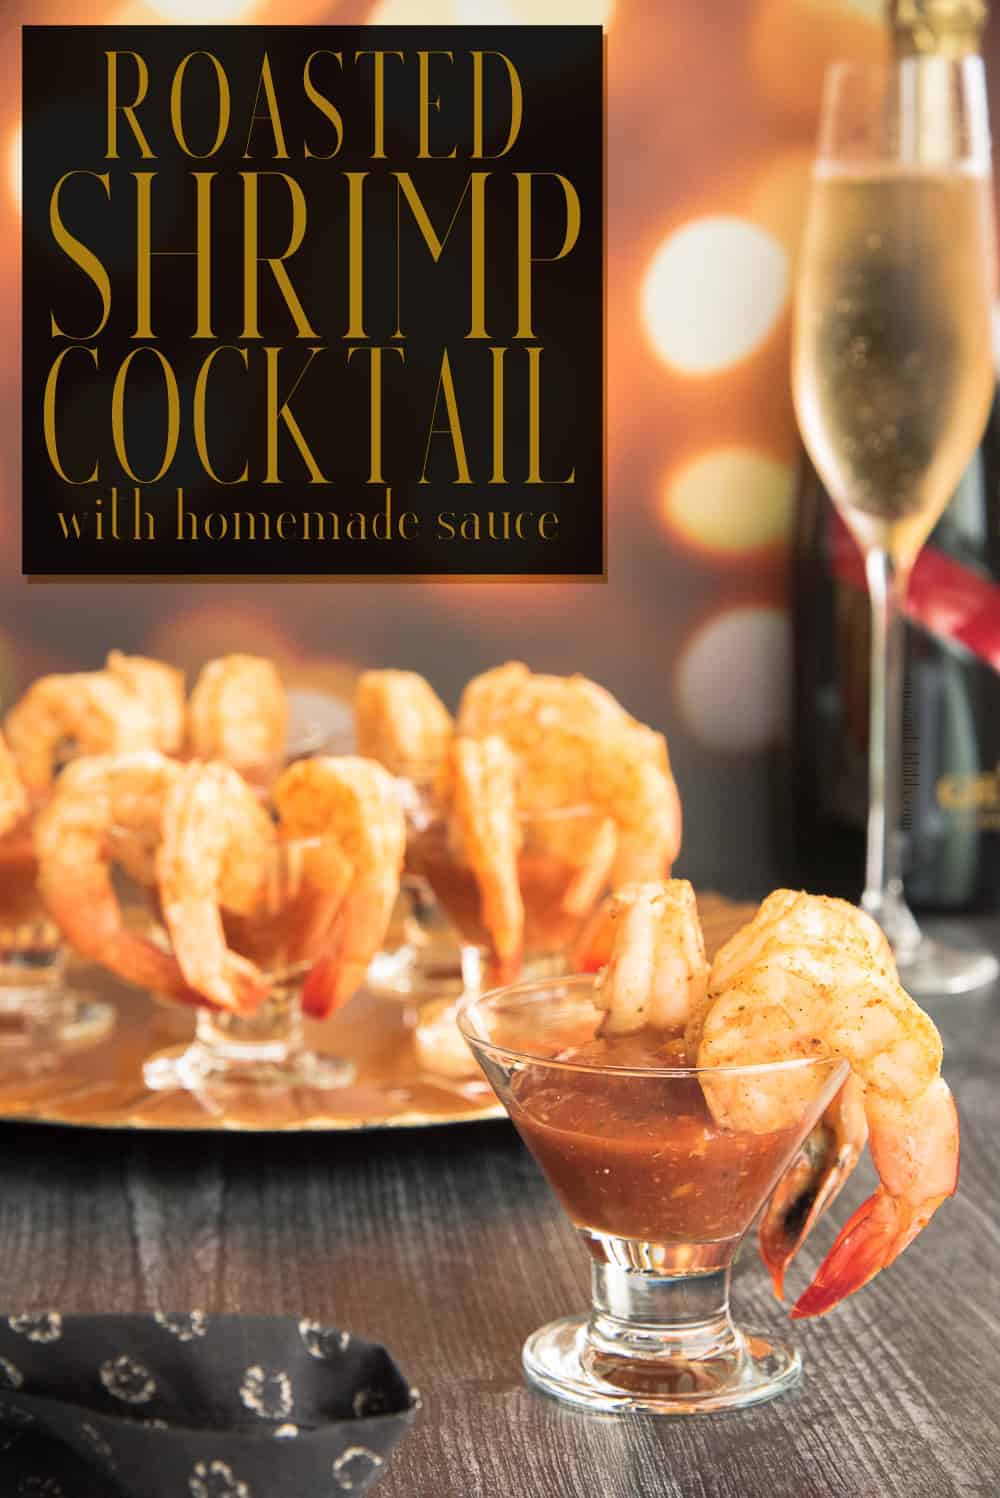 Boiled shrimp cocktail is so 80s. Give your next soiree a bit more flavor with this Roasted Shrimp Cocktail with Homemade Cocktail Sauce. Roasting the shrimp gives it more flavor and making your cocktail sauce from scratch makes this an appetizer you'll make again and again. #shrimpcocktail #shrimp #seafood #cocktailparty #NYE #appetizer #appetizerrecipe #shrimpappetizer #roastedshrimp #partyfood #horsdoeuvres via @ediblesense